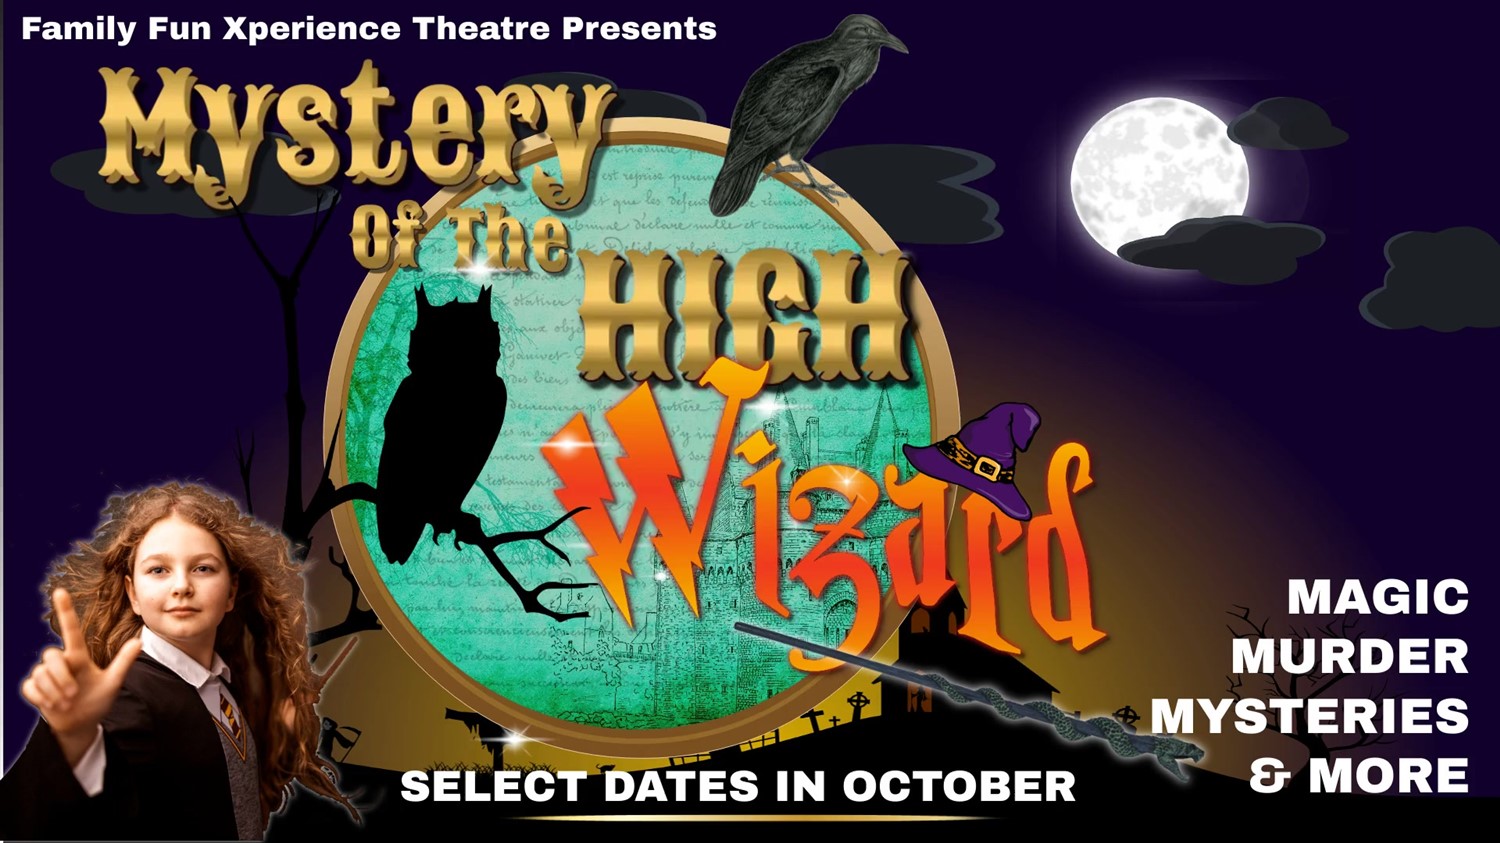 🗝 MYSTERY of the HIGH WIZARD⚡️ Magic, Murder, Mysteries, and More to solve! on oct. 30, 19:00@FFX Theatre - Pick a seat, Buy tickets and Get information on Family Fun Xperience tickets.ffxshow.org